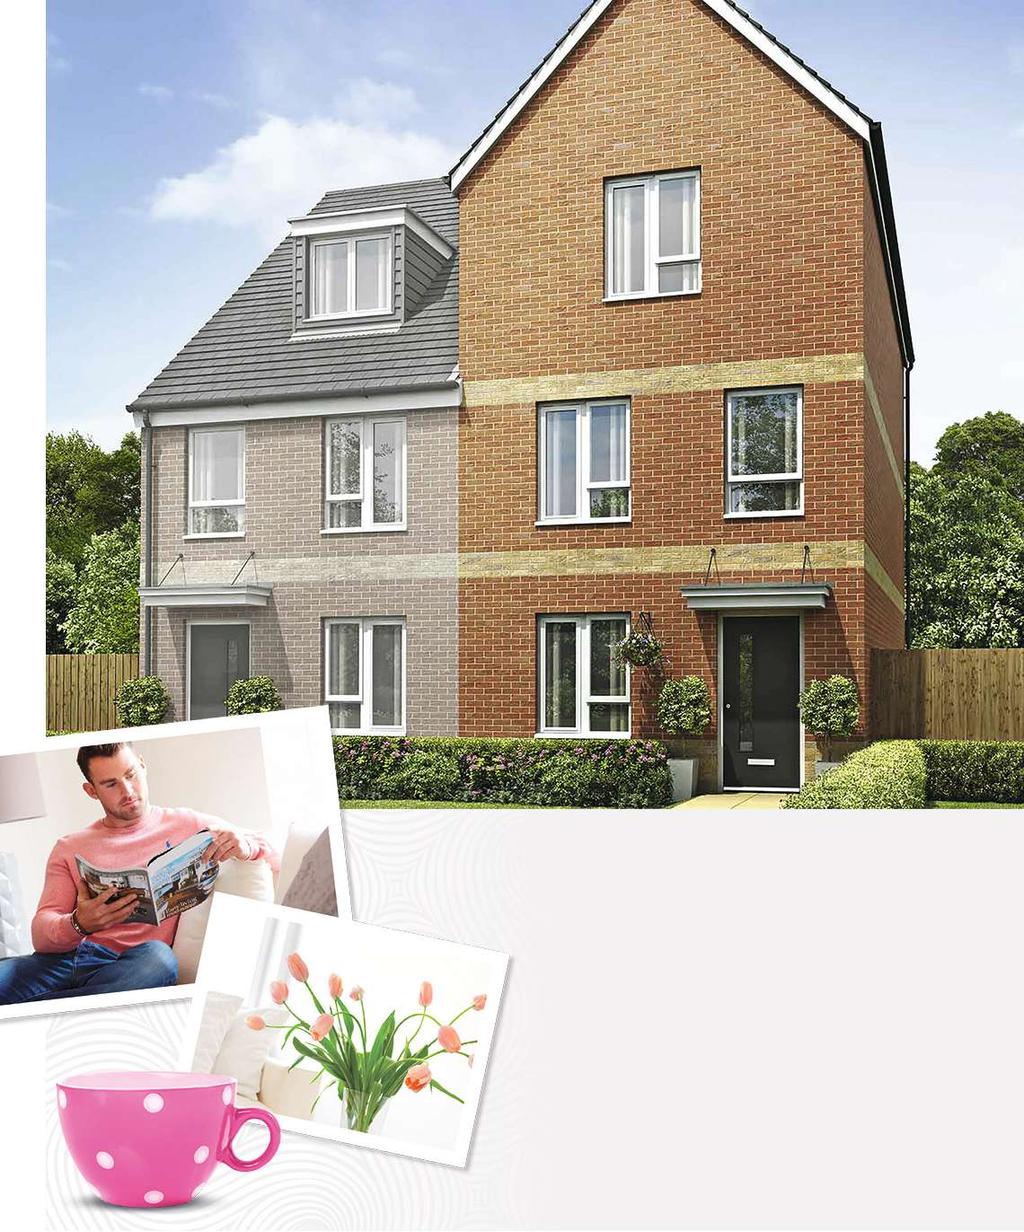 LATITUDE @ THE QUAYS The Ashbury 4 bedroom home ith accommodation across three storeys, The Ashbury is a superb 4 bedroom home.